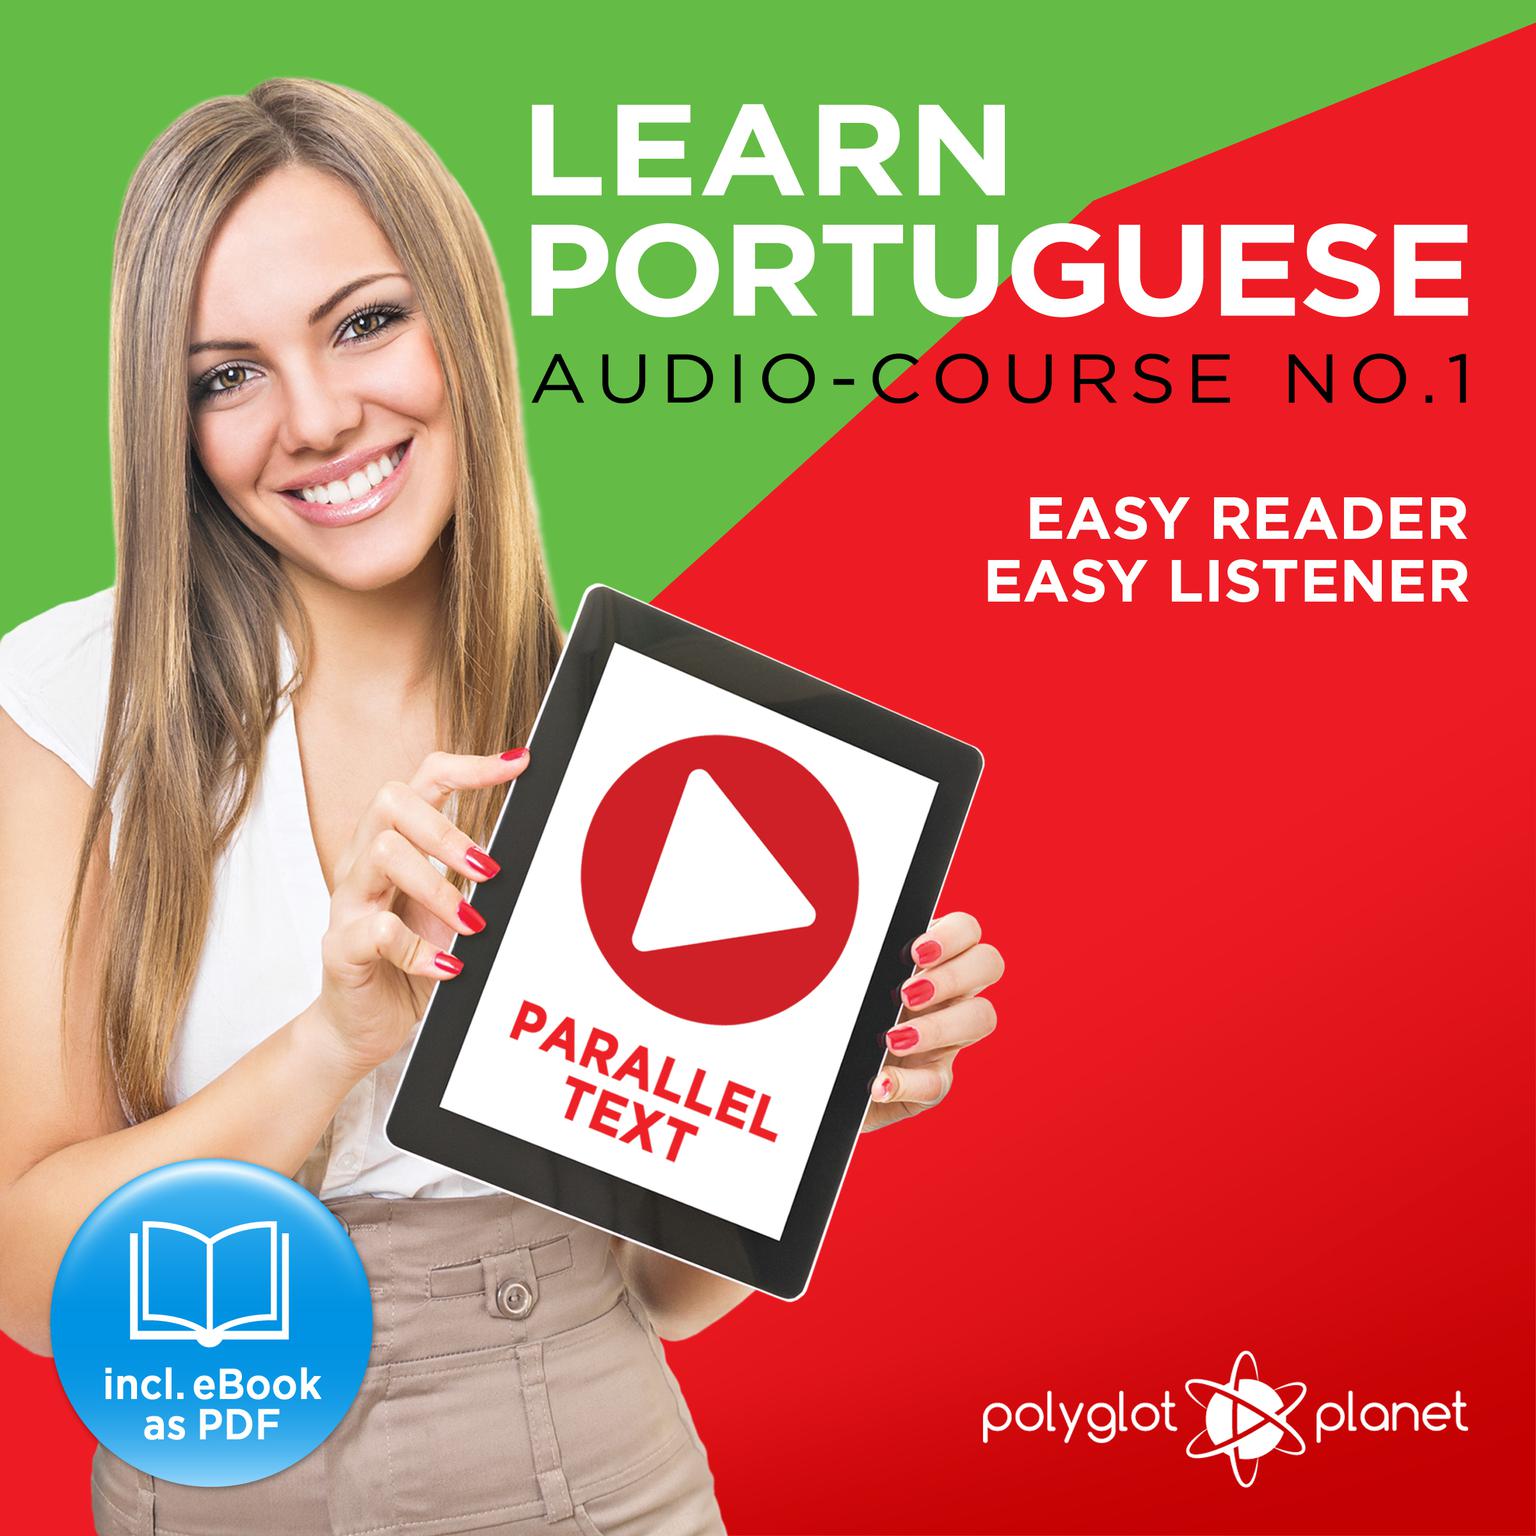 Learn Portuguese - Easy Reader - Easy Listener Parallel Text: Portuguese Audio Course No. 1 - The Portuguese Easy Reader - Easy Audio Learning Course Audiobook, by Polyglot Planet